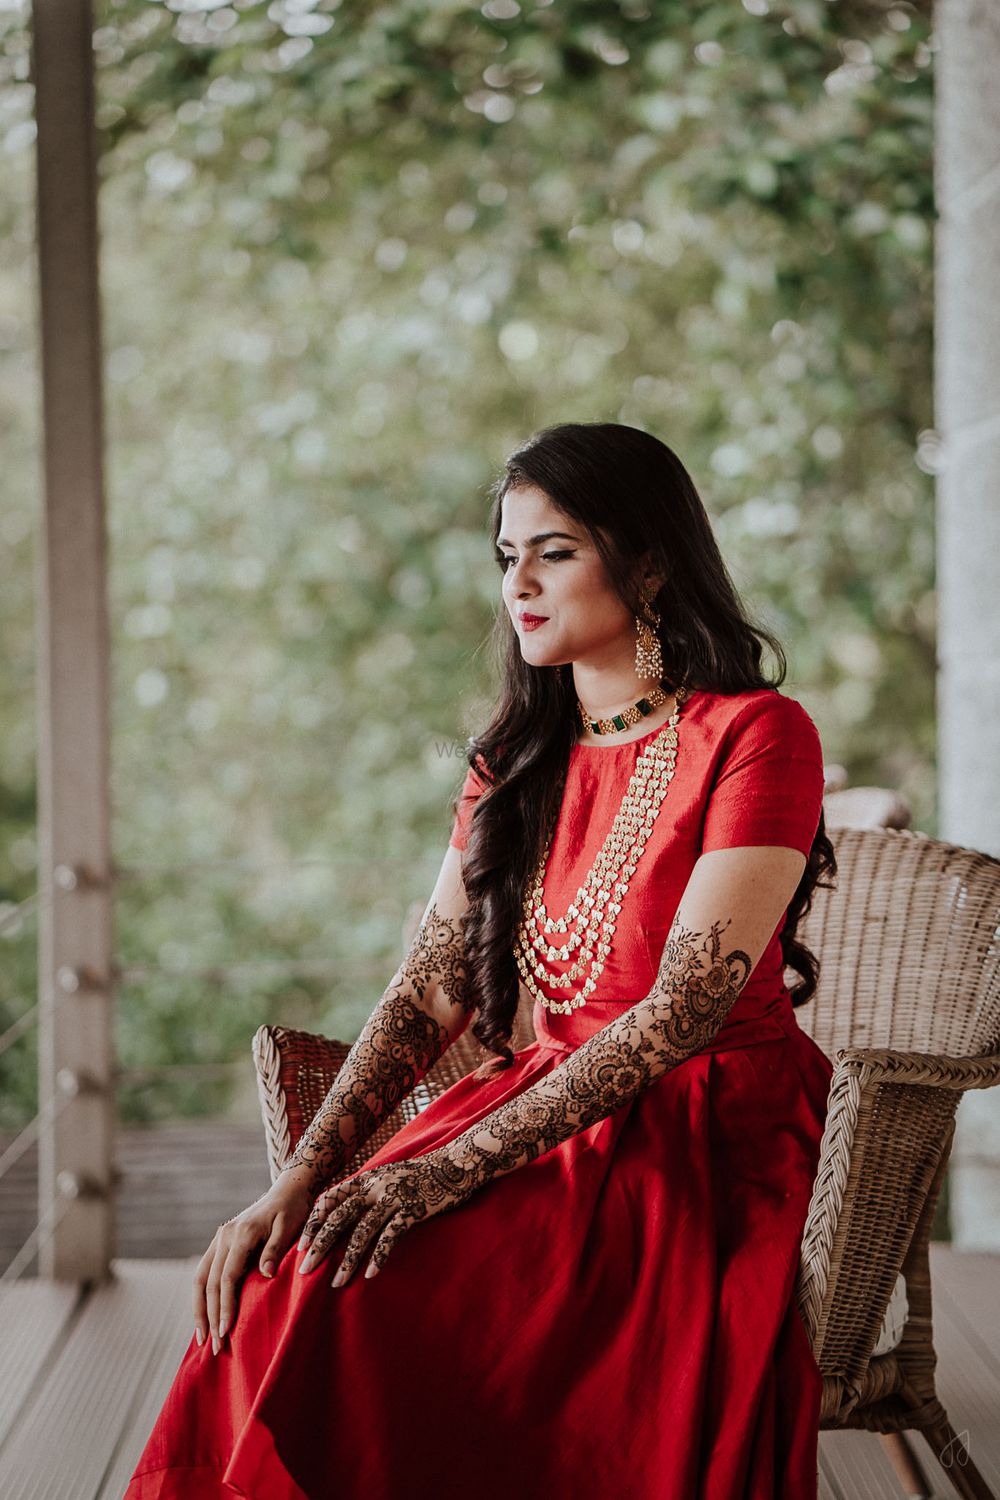 Photo of simple mehendi outfit in red with bridal mehendi on hands